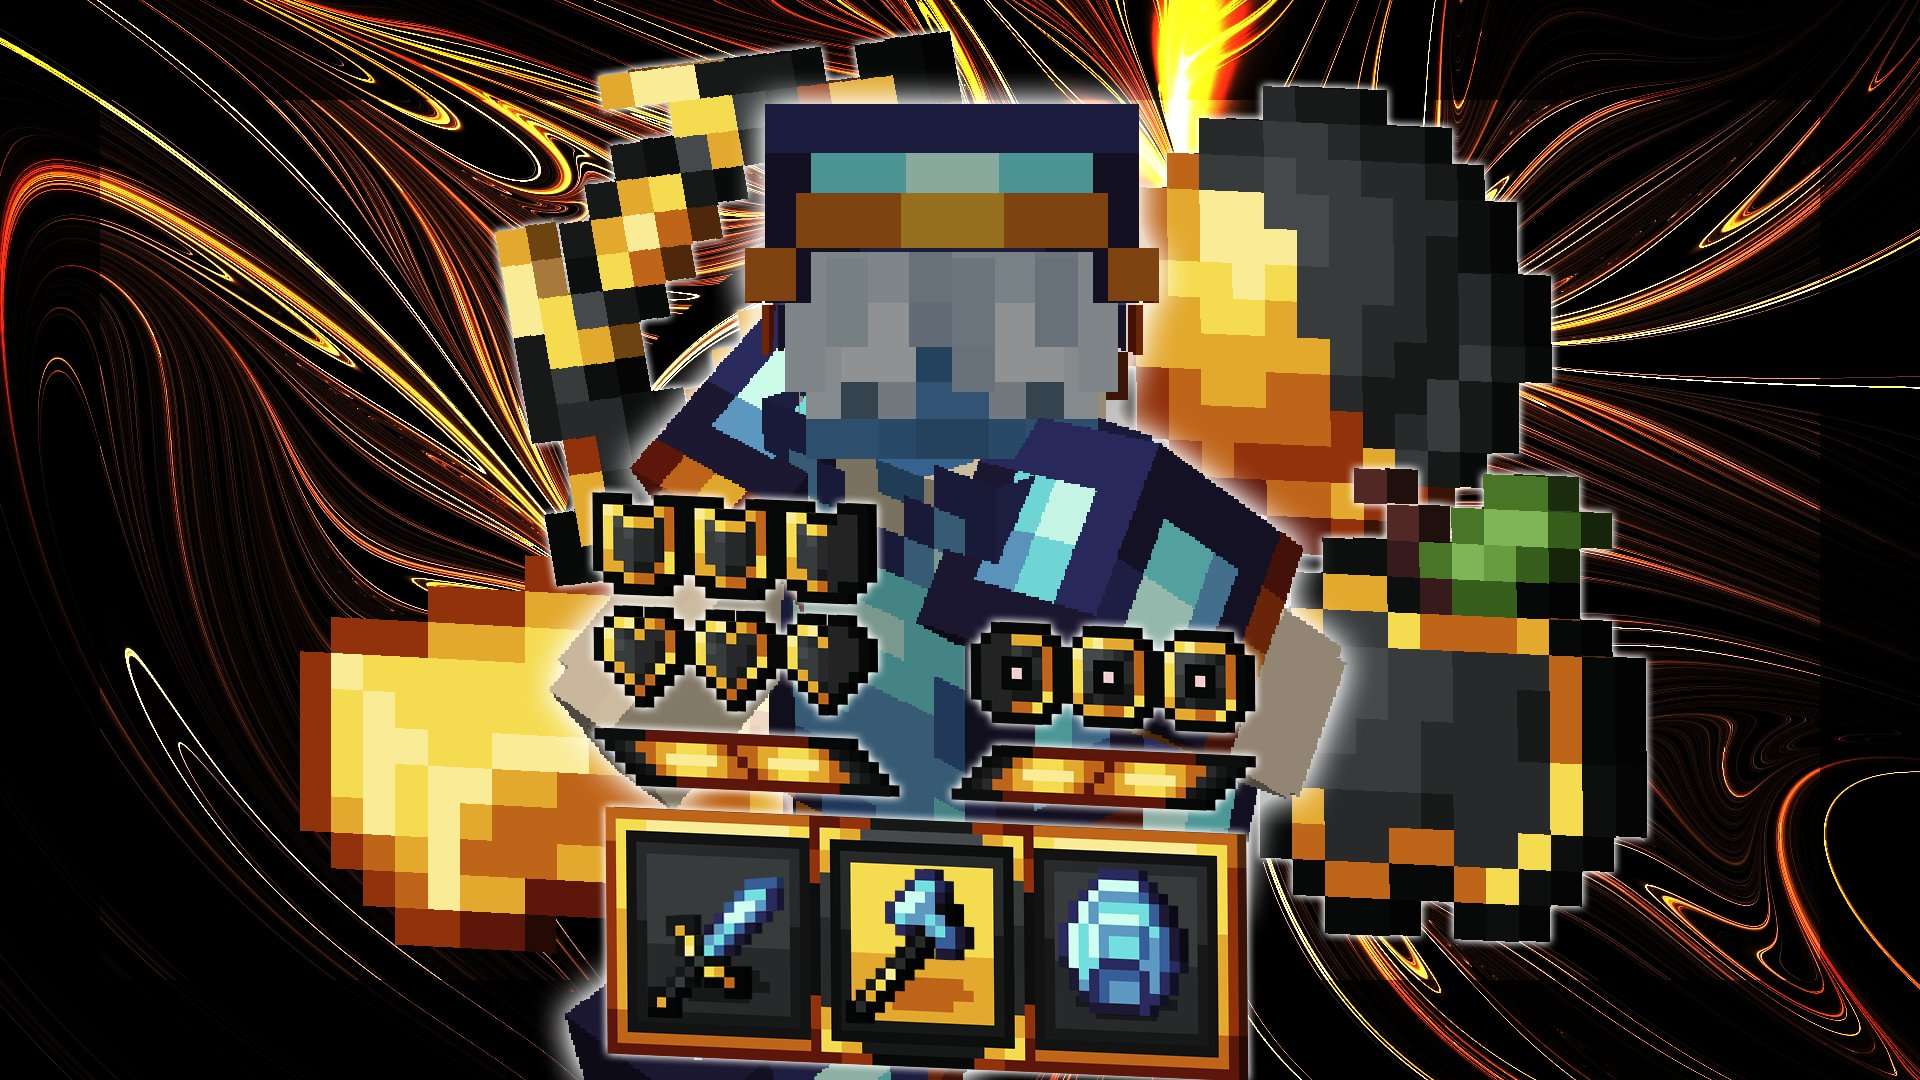 Black & Gold v2  16x by reiKo & Cloudity on PvPRP